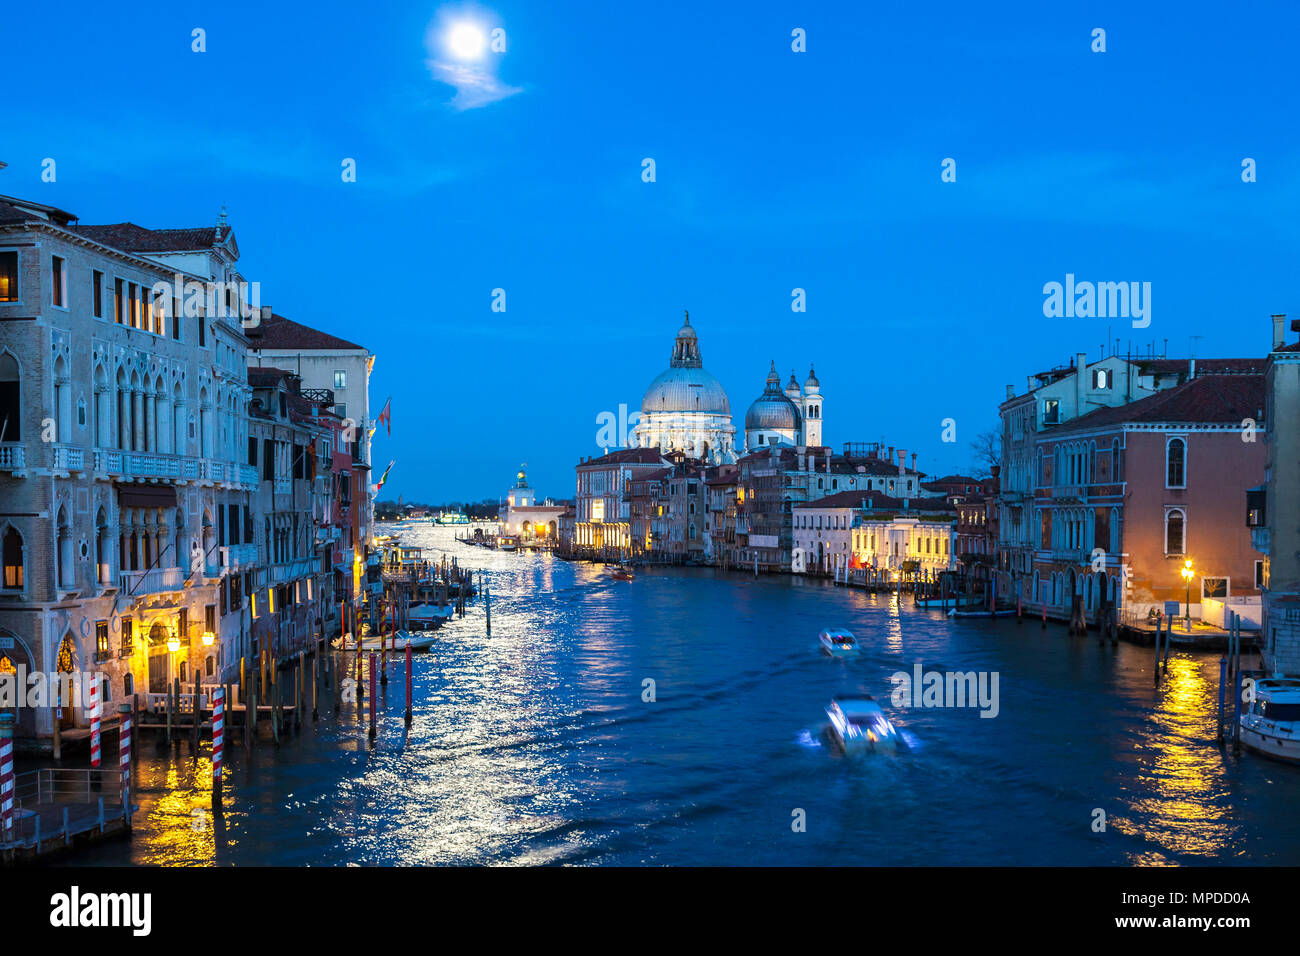 Full moon at blue hour over the Grand Canal, Venice, Veneto, Italy with Basilica di Santa Maria della Salute. Reflection on the water and a water taxi Stock Photo